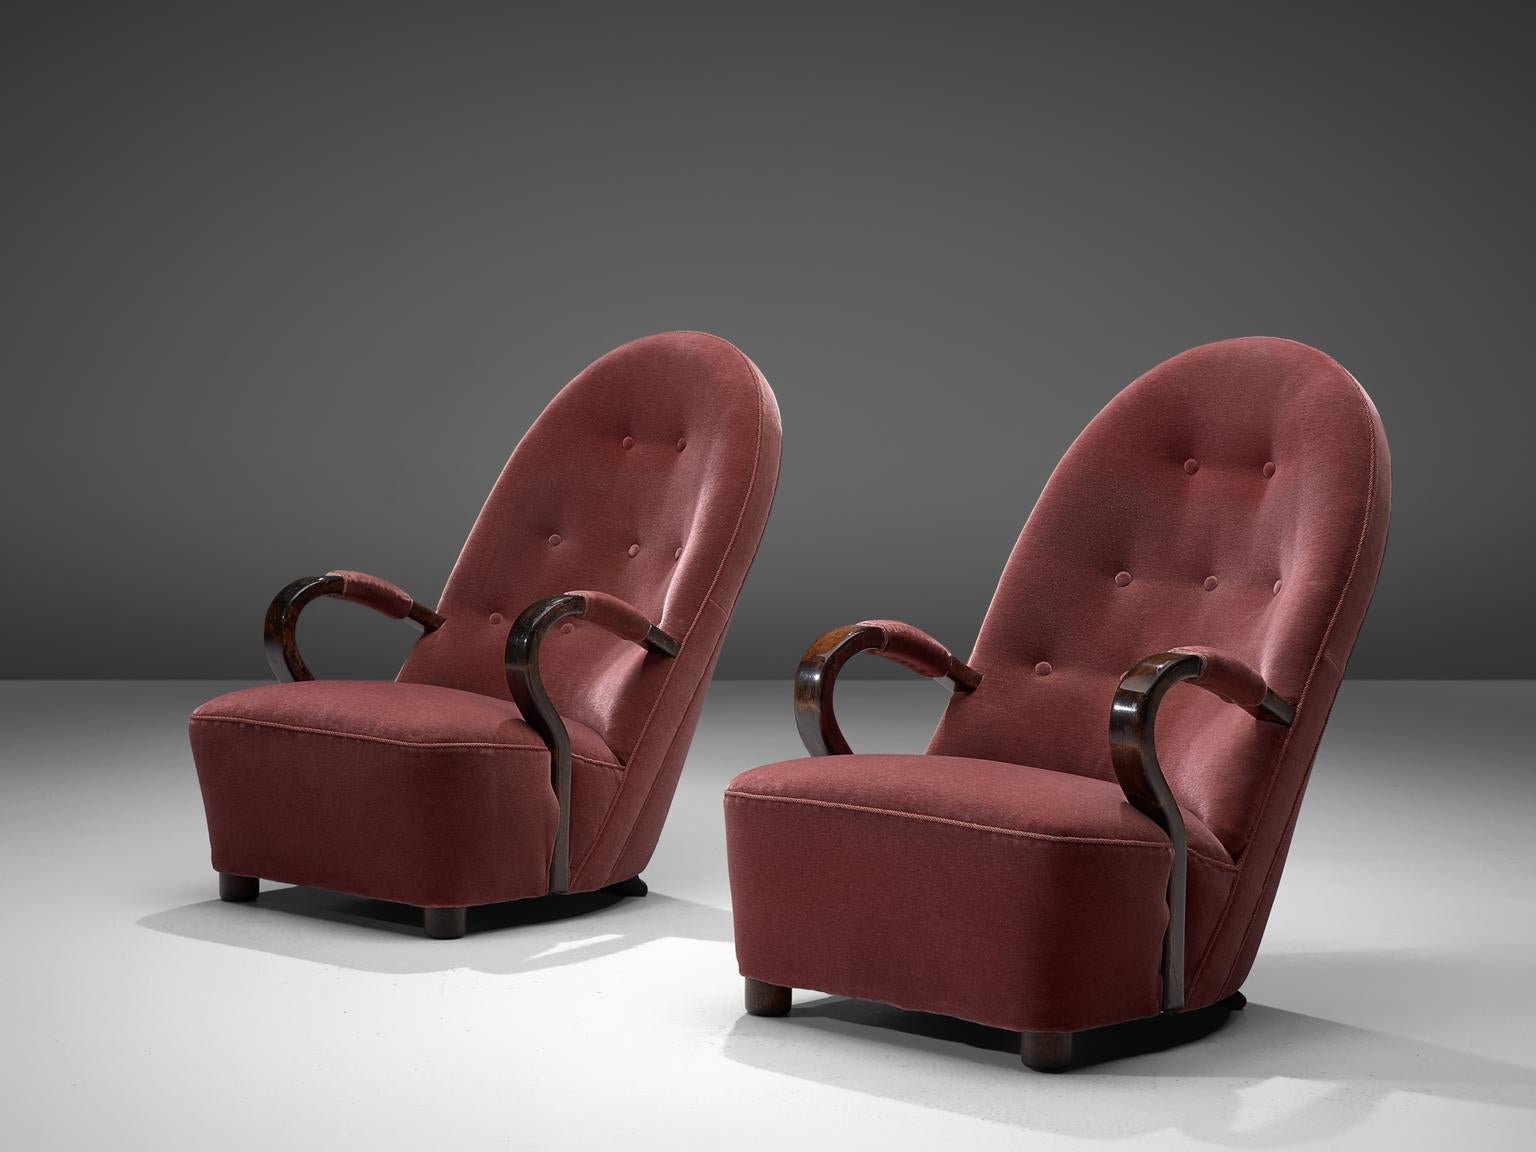 Pair of red/pink Art Deco lounge chairs, velvet and dark stained oak, France, 1930's

These Art Deco arm chairs feature a high majestic backrest with elegant, bended armrests, and a voluptuous seat. The short legs are tubes shaped made of dark